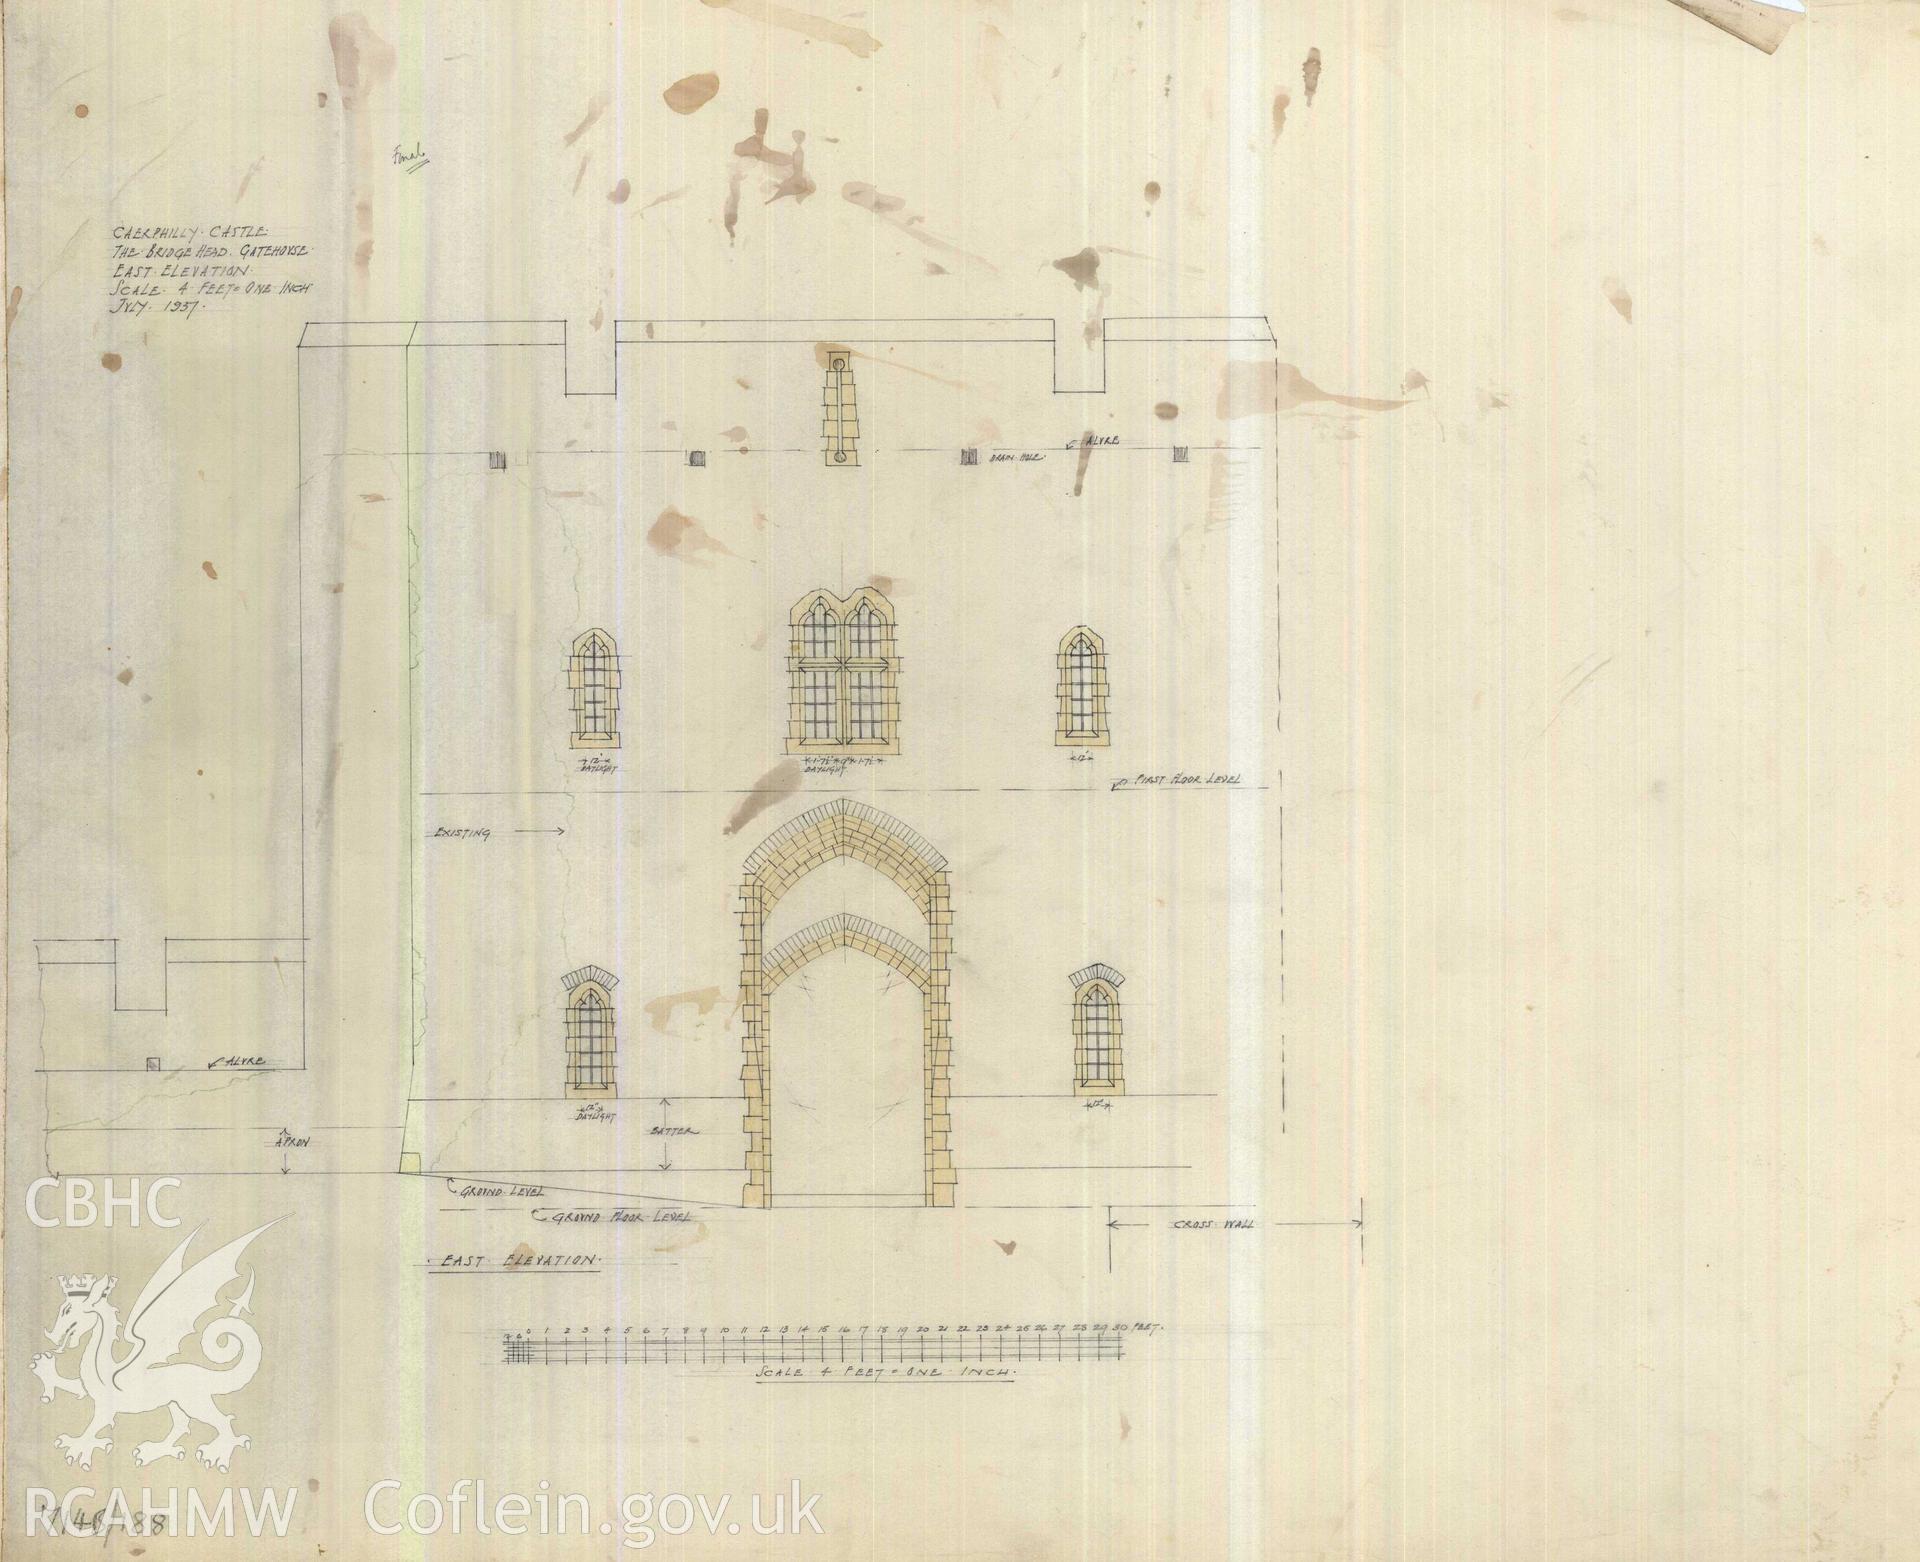 Cadw guardianship monument drawing of Caerphilly Castle. Dam, S gate, inner (E) elev (iv). Cadw Ref. No:714B/188. Scale 1:48.